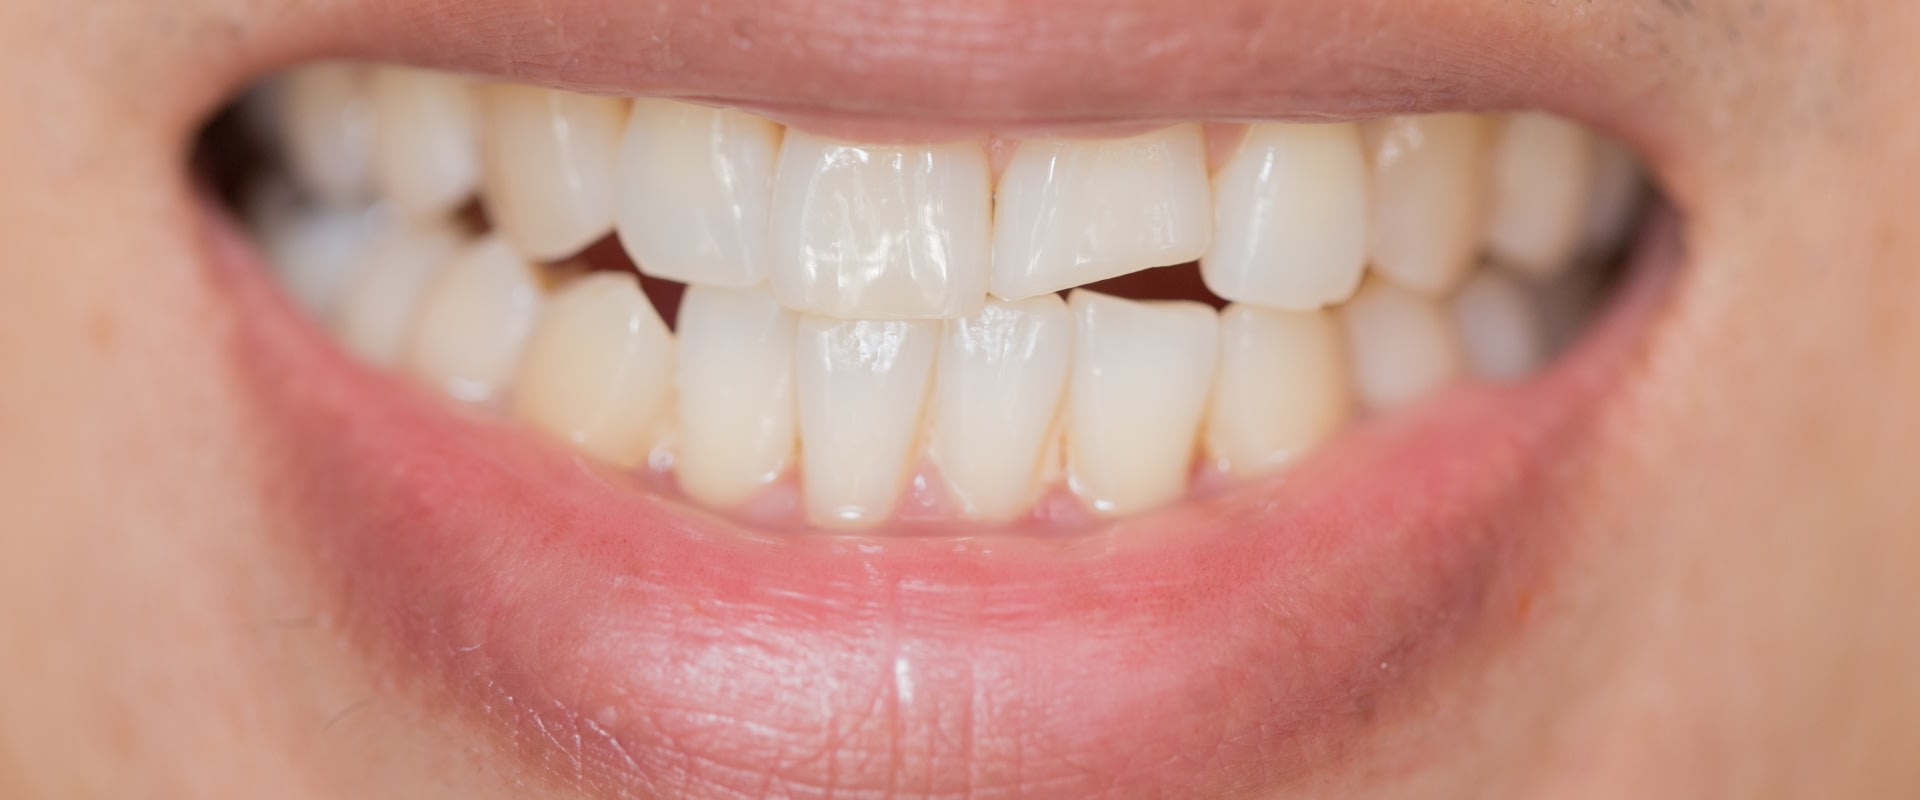 What Are the Consequences of Not Repairing a Chipped Tooth?